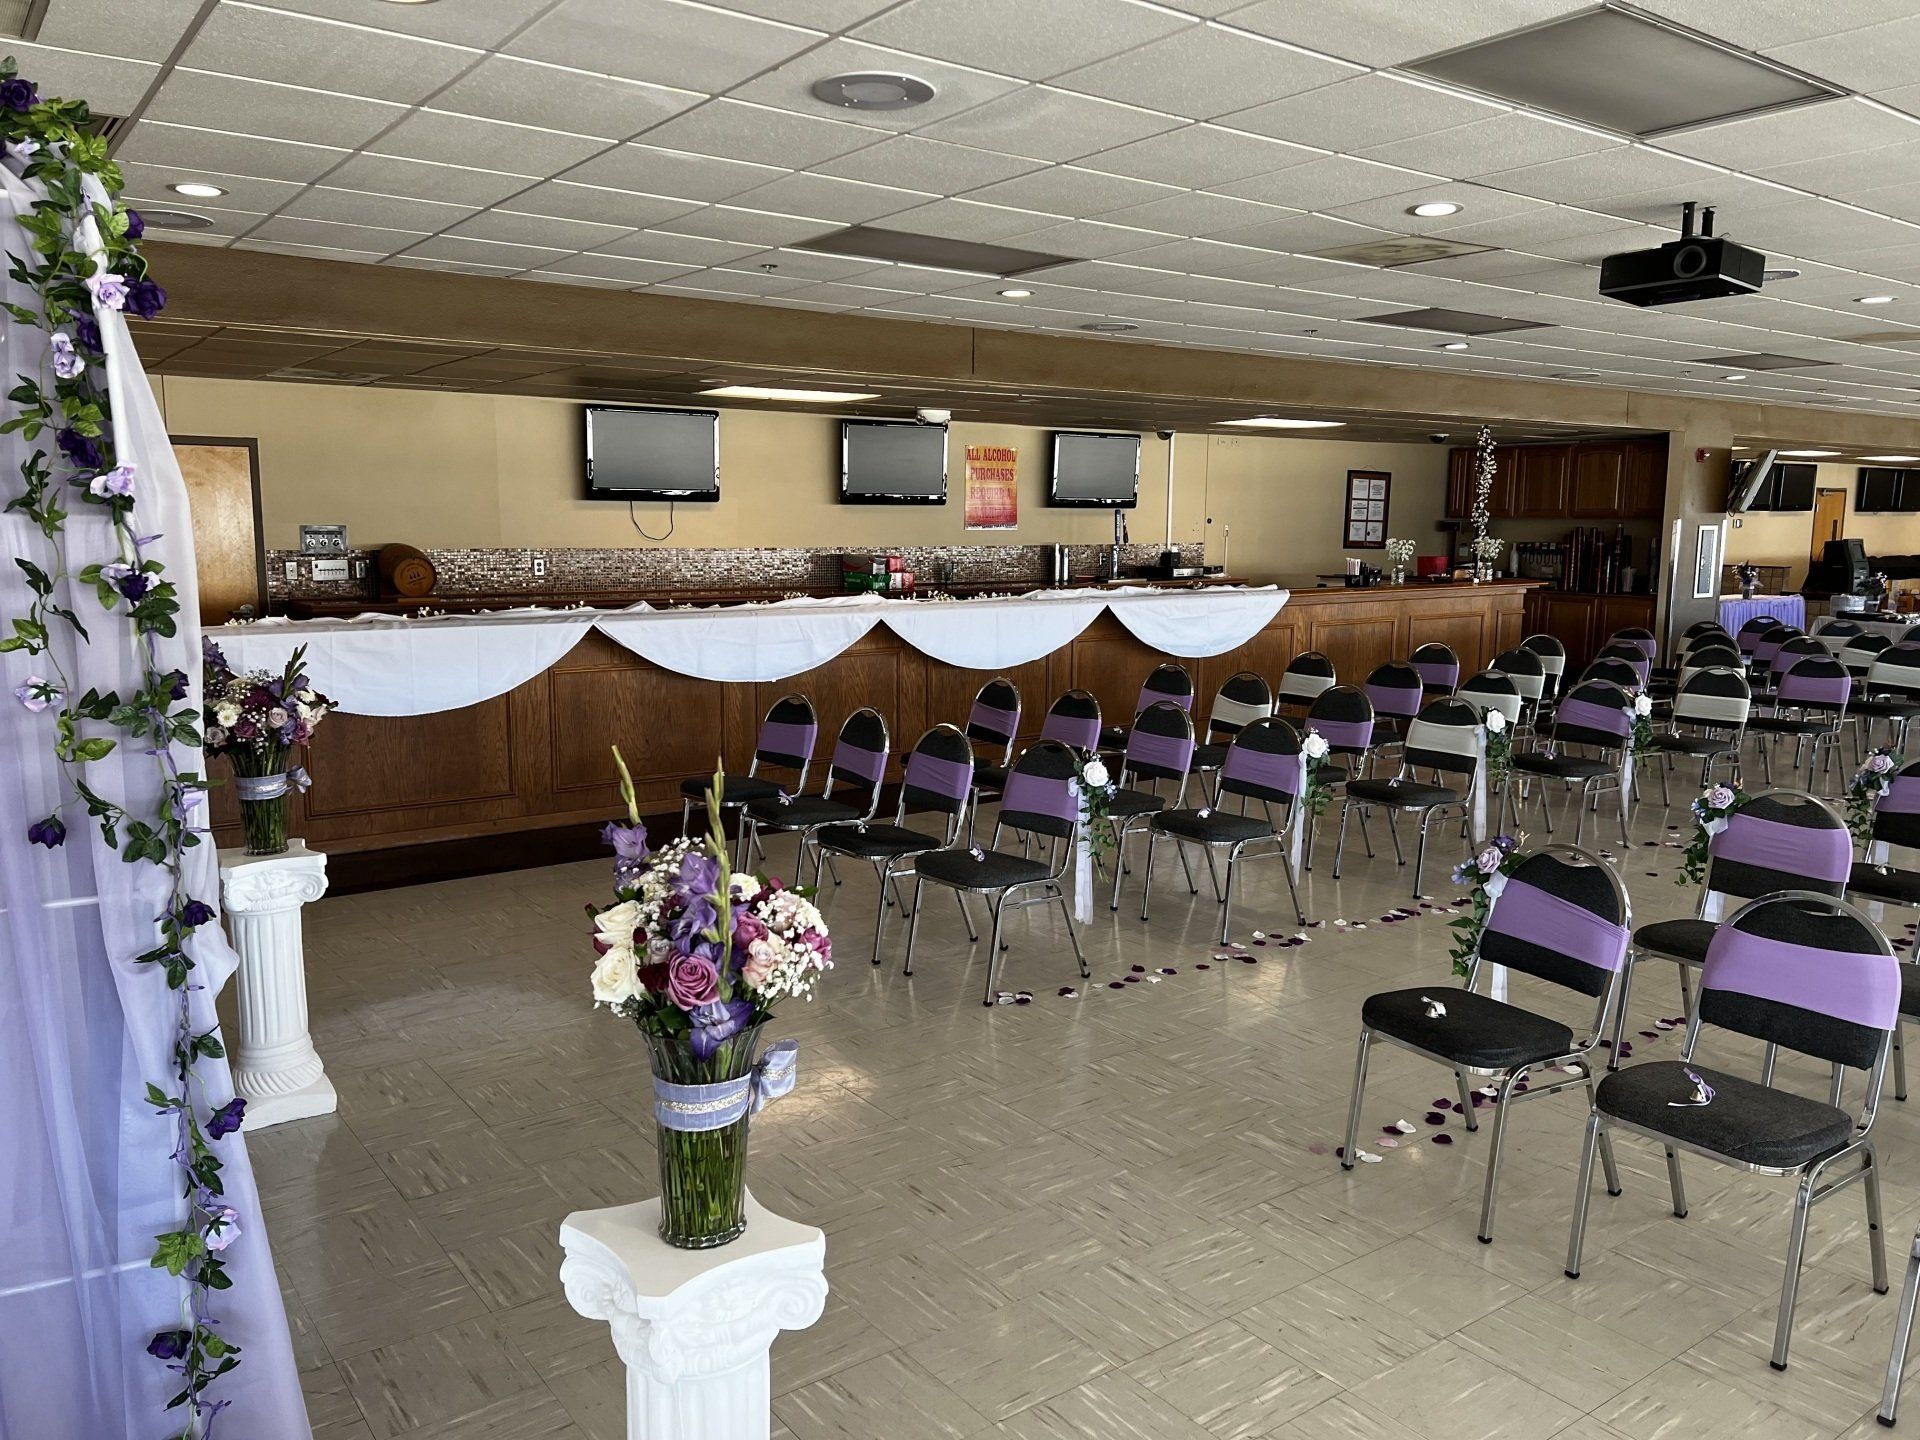 High desert club banquet room for weddings, quinceaneras and receptions